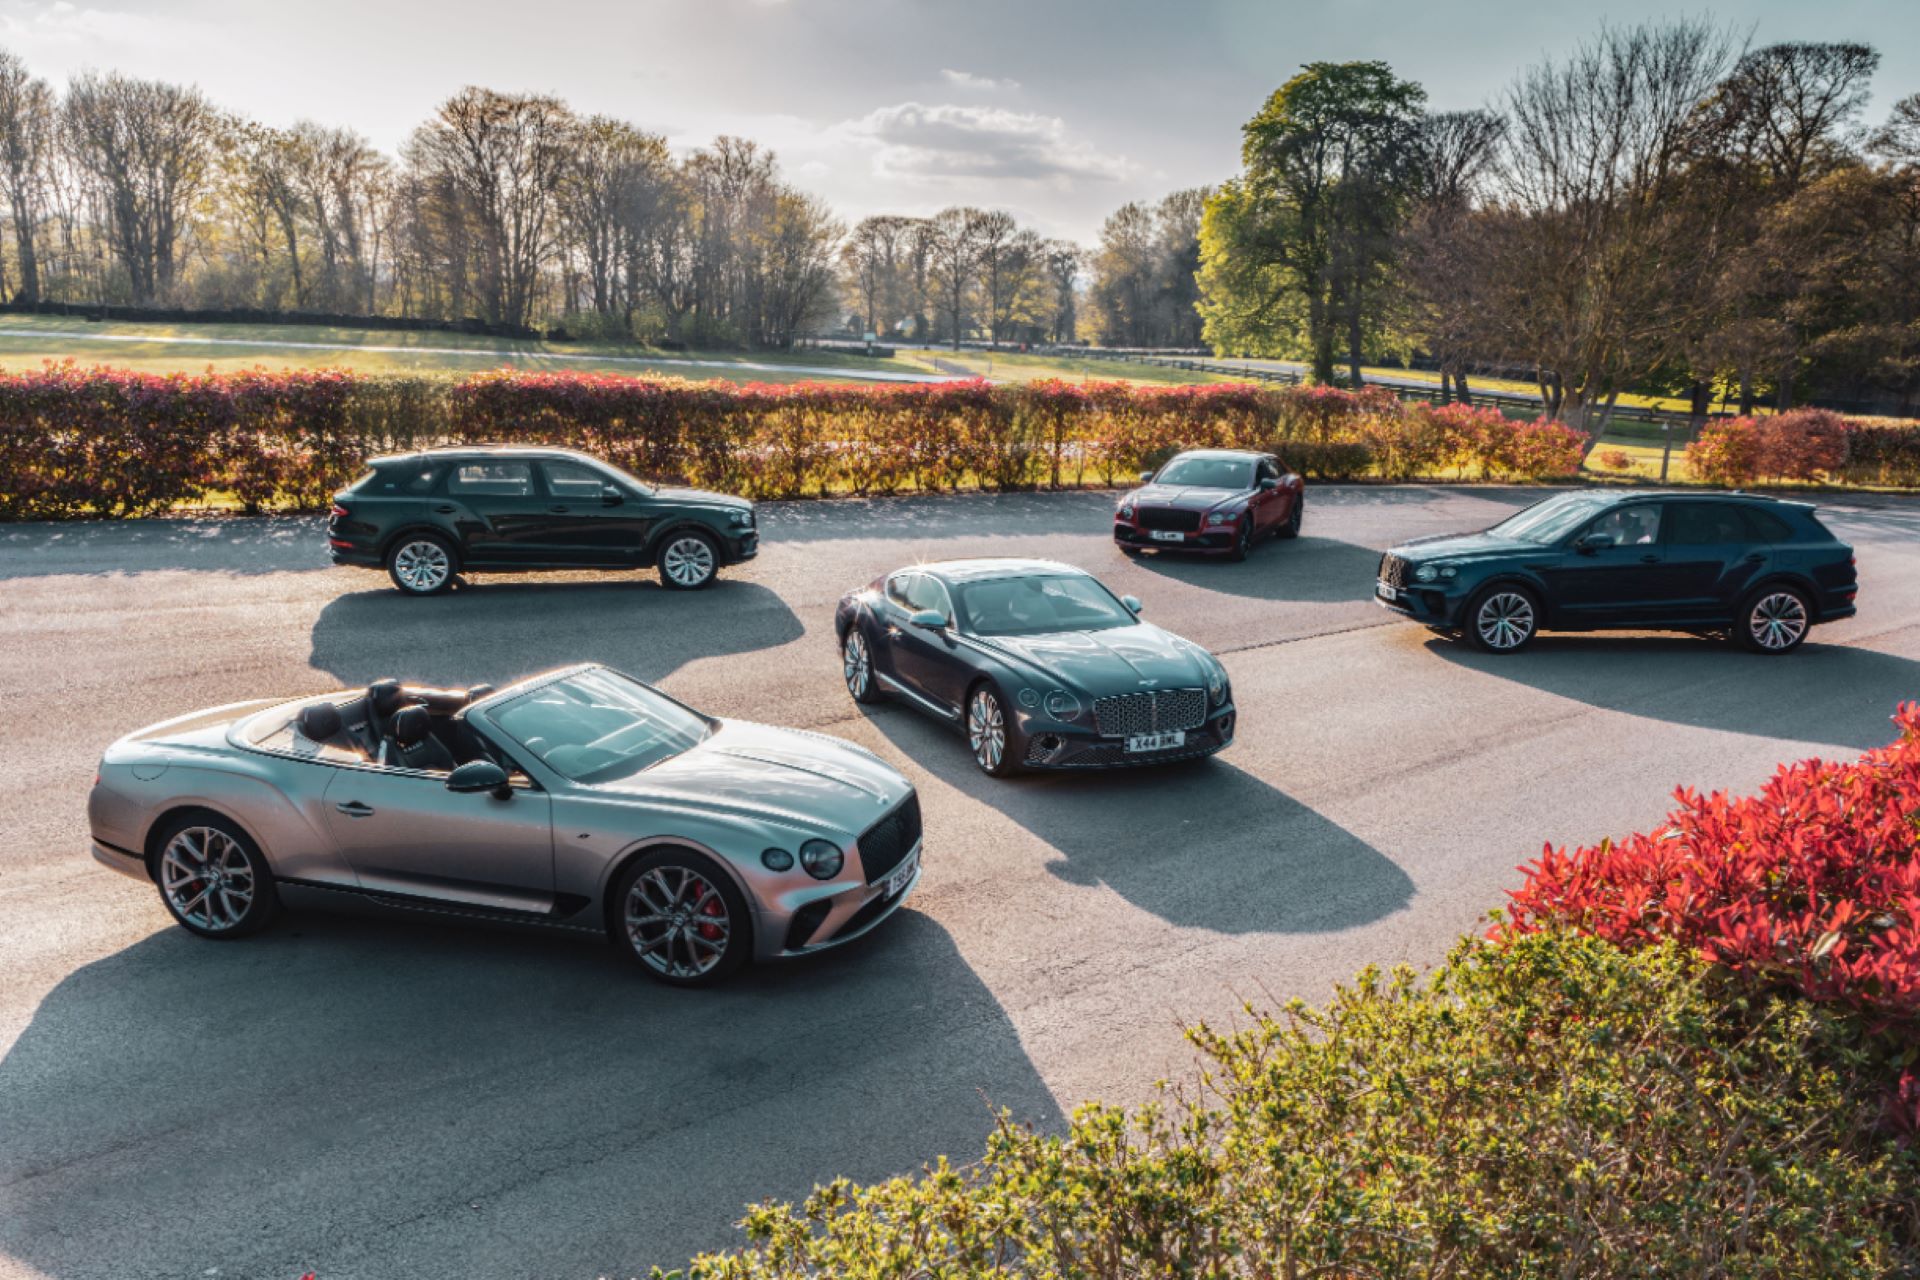 Bentley Motors named Britain’s Most Admired Automotive Manufacturer for second consecutive year